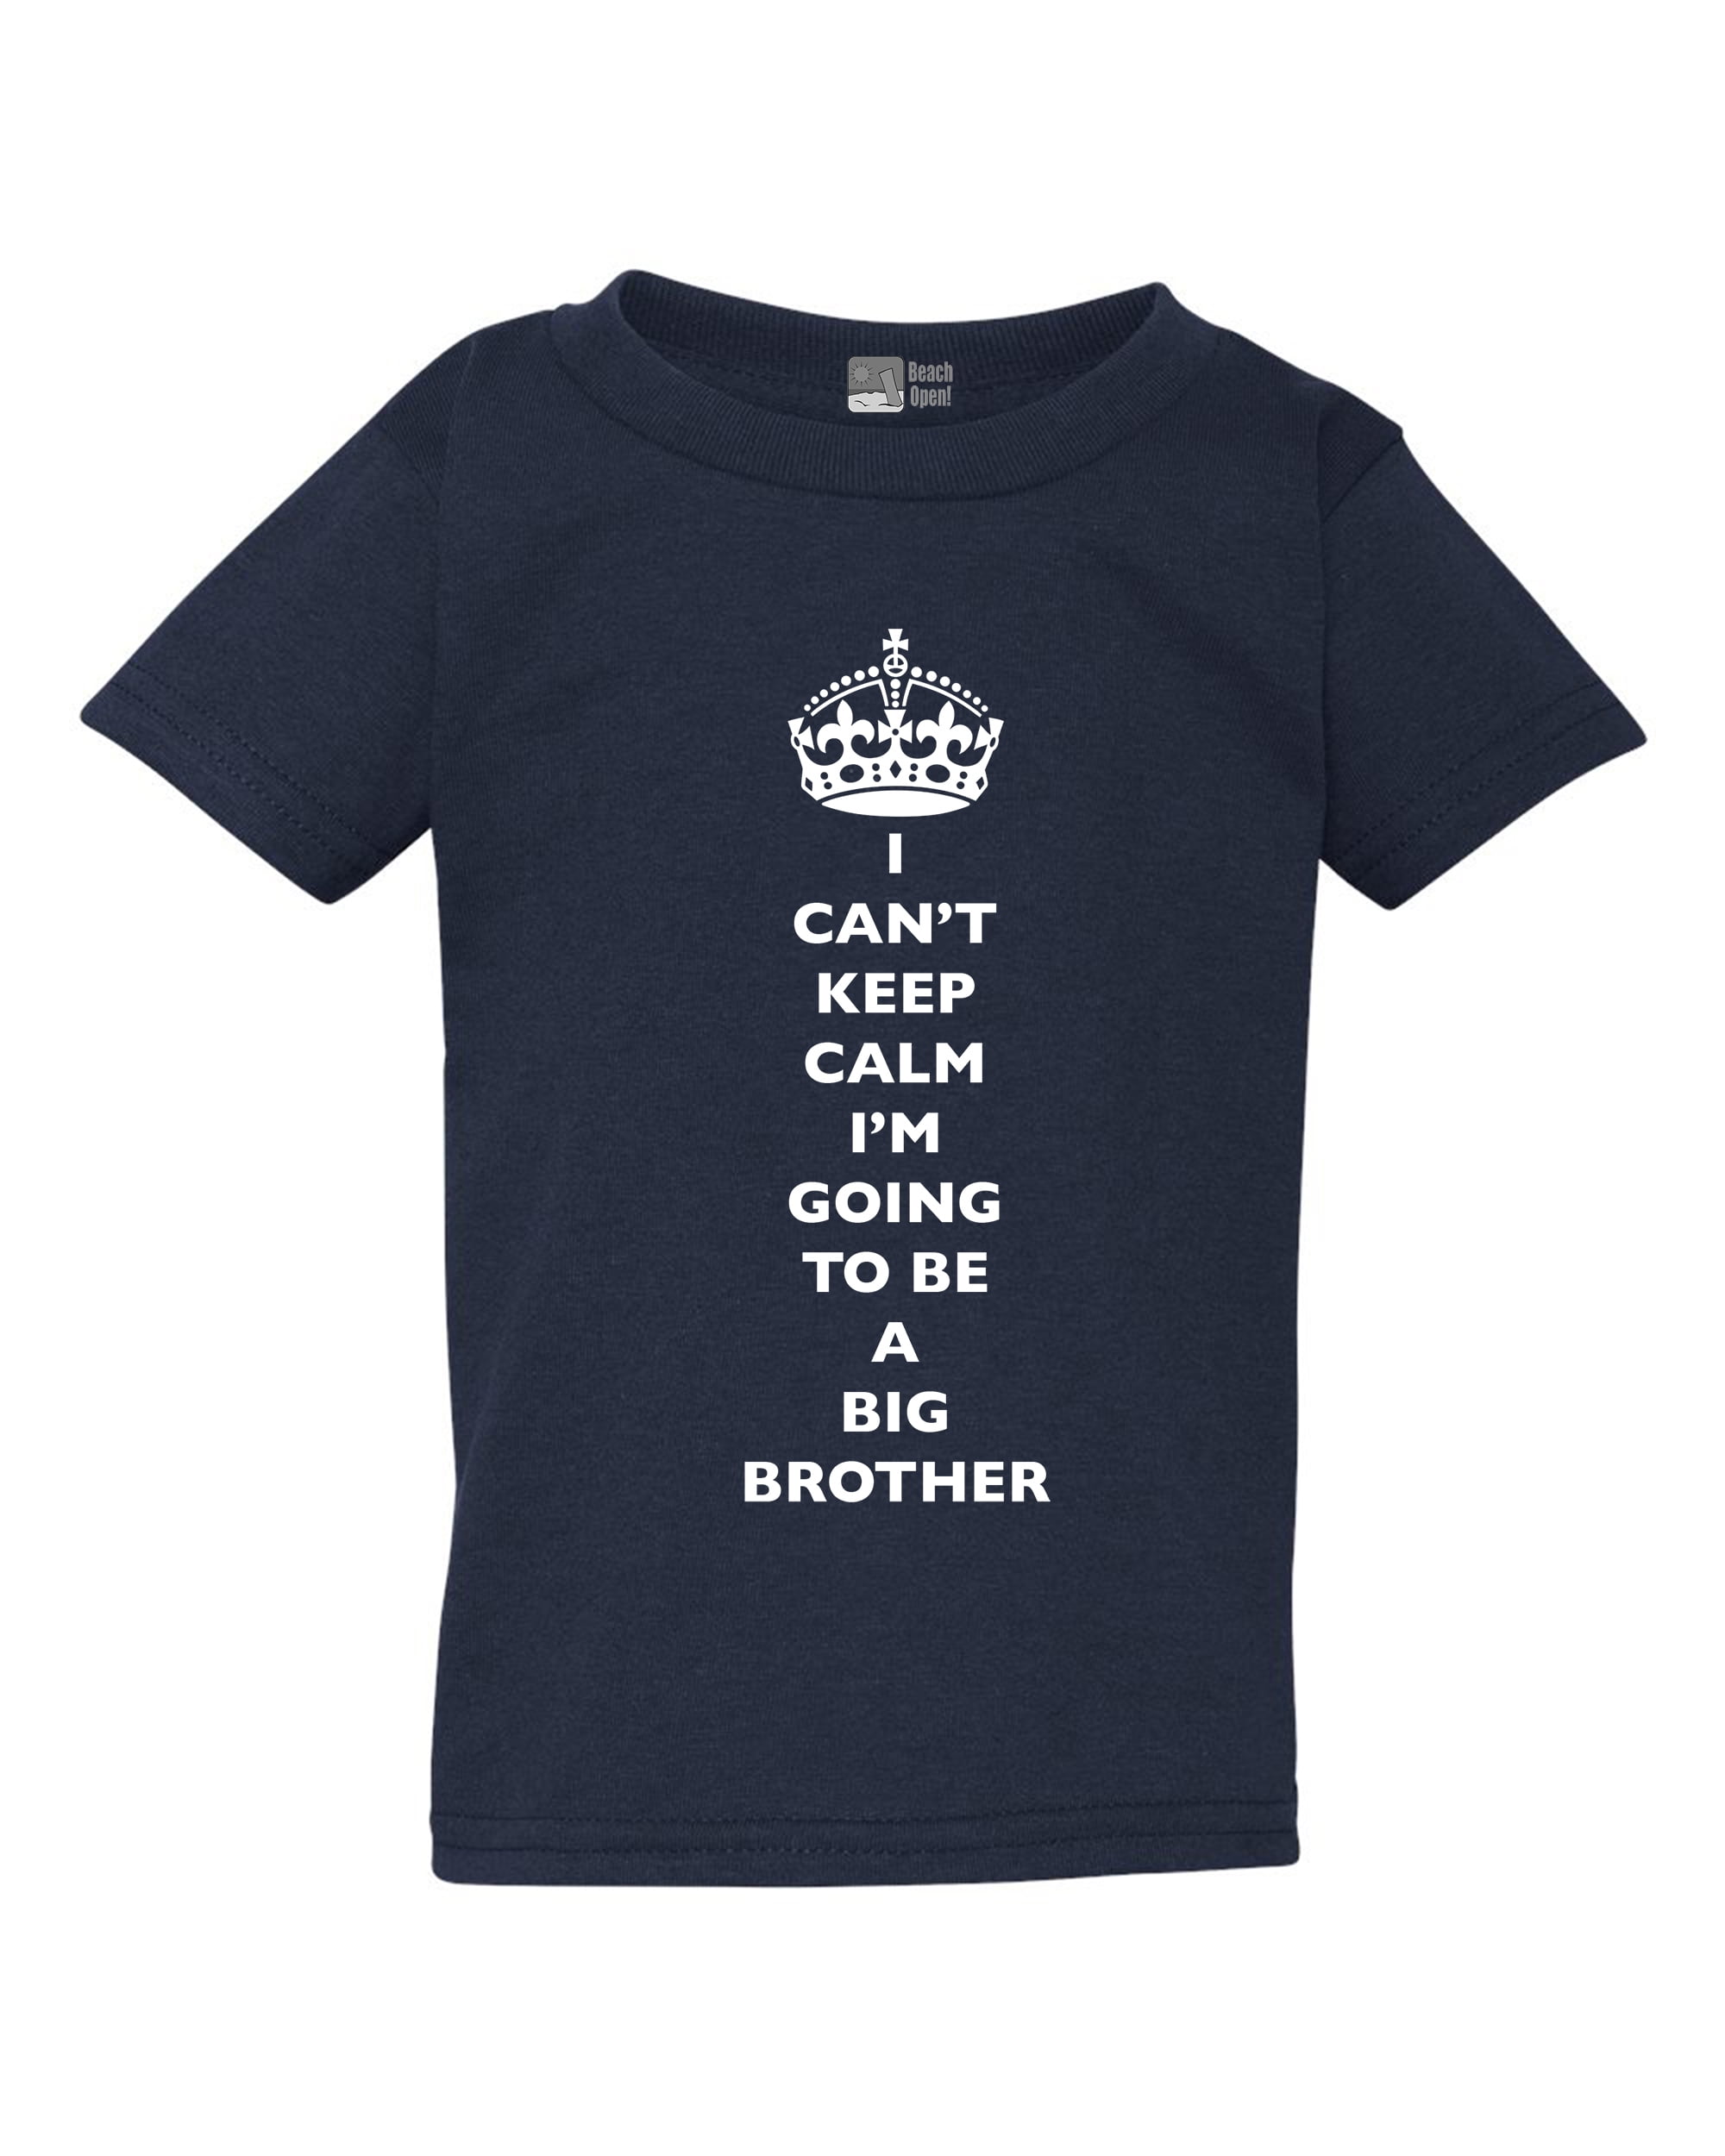 Youth I Can't Keep Calm I'm Going To Be A Brother T-Shirt Boys Kids New Baby Tee 